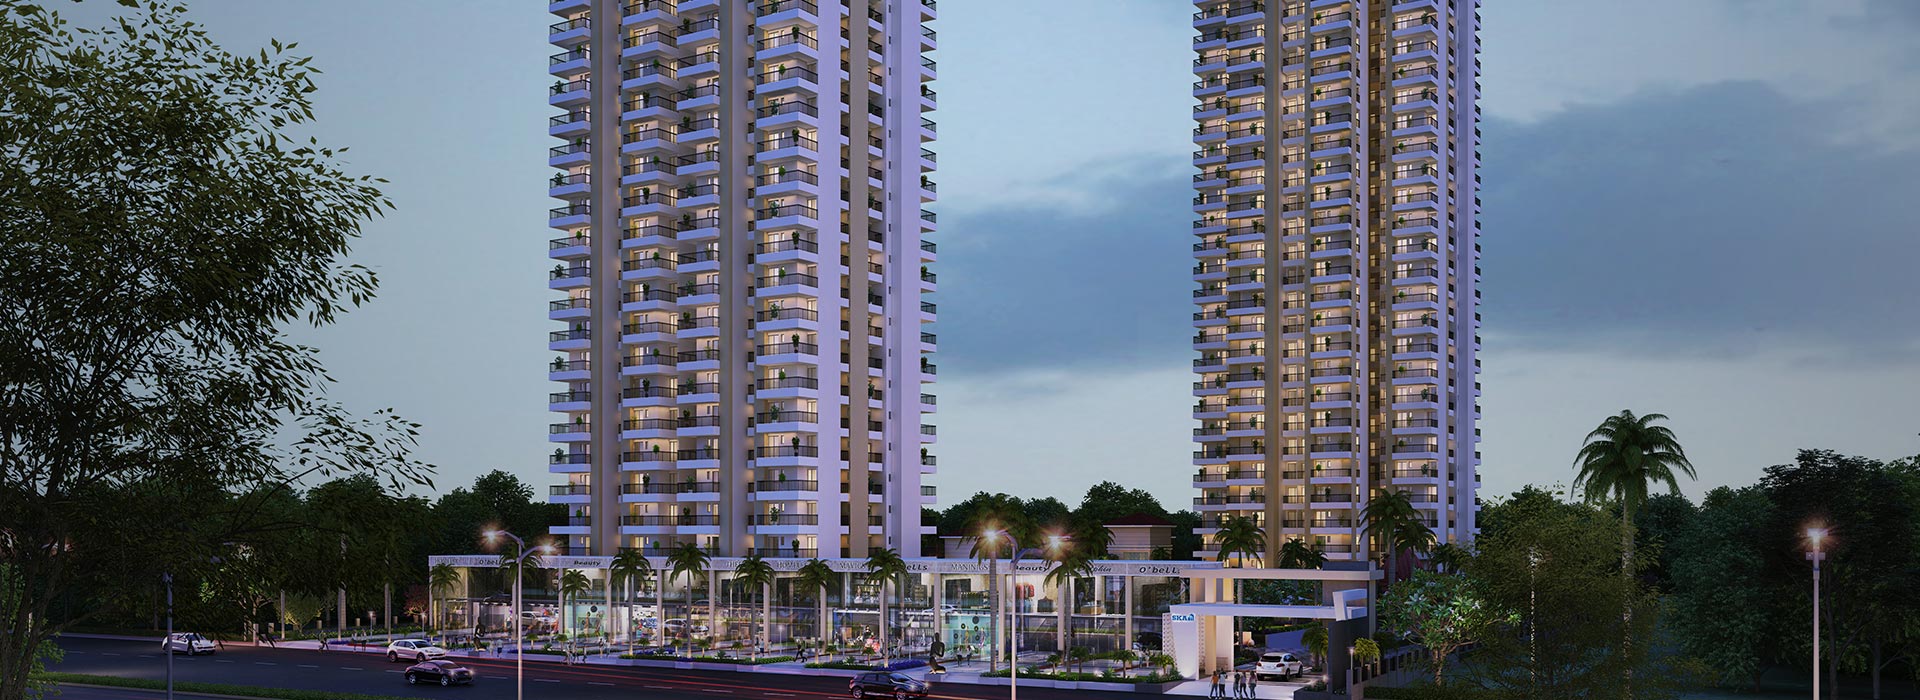 3 BHK flats in Greater Noida West